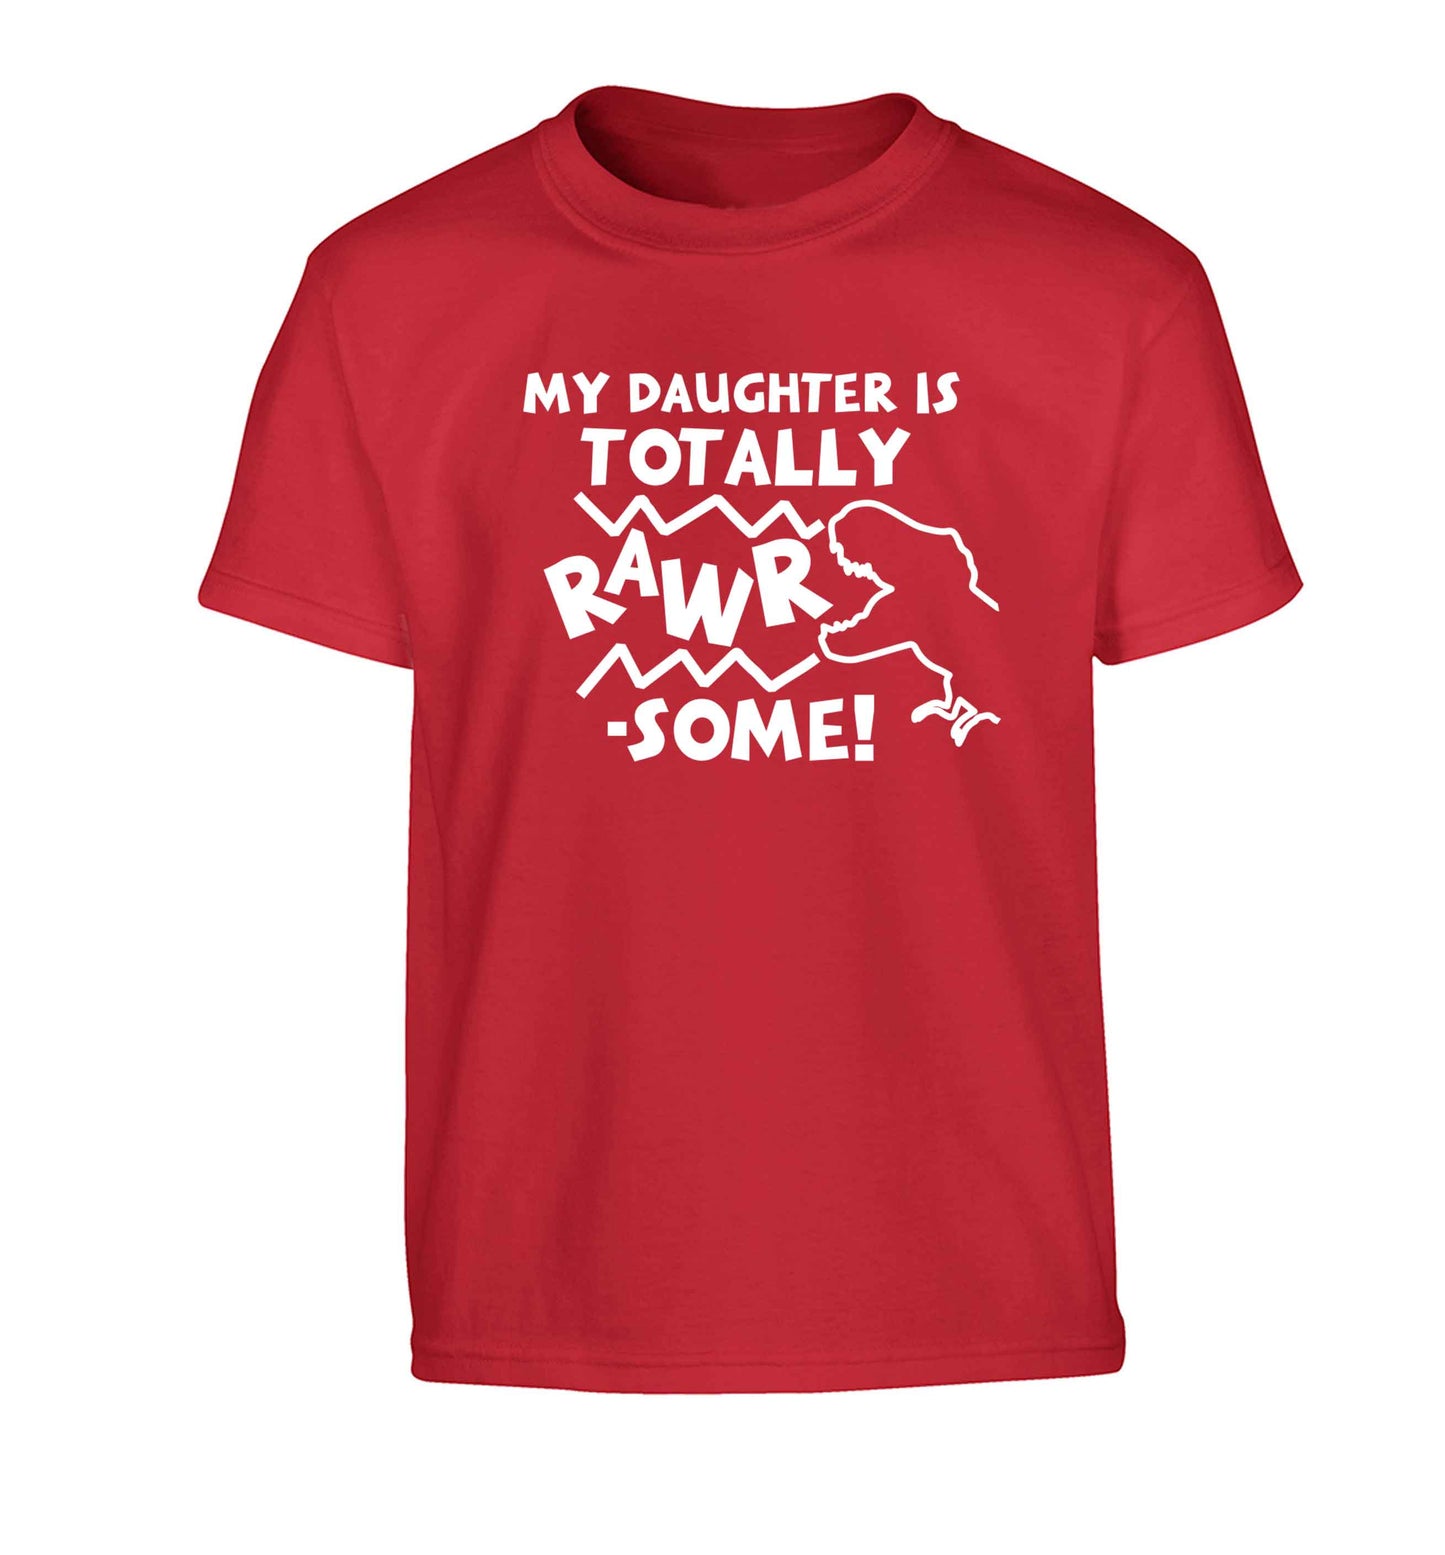 My daughter is totally rawrsome Children's red Tshirt 12-13 Years